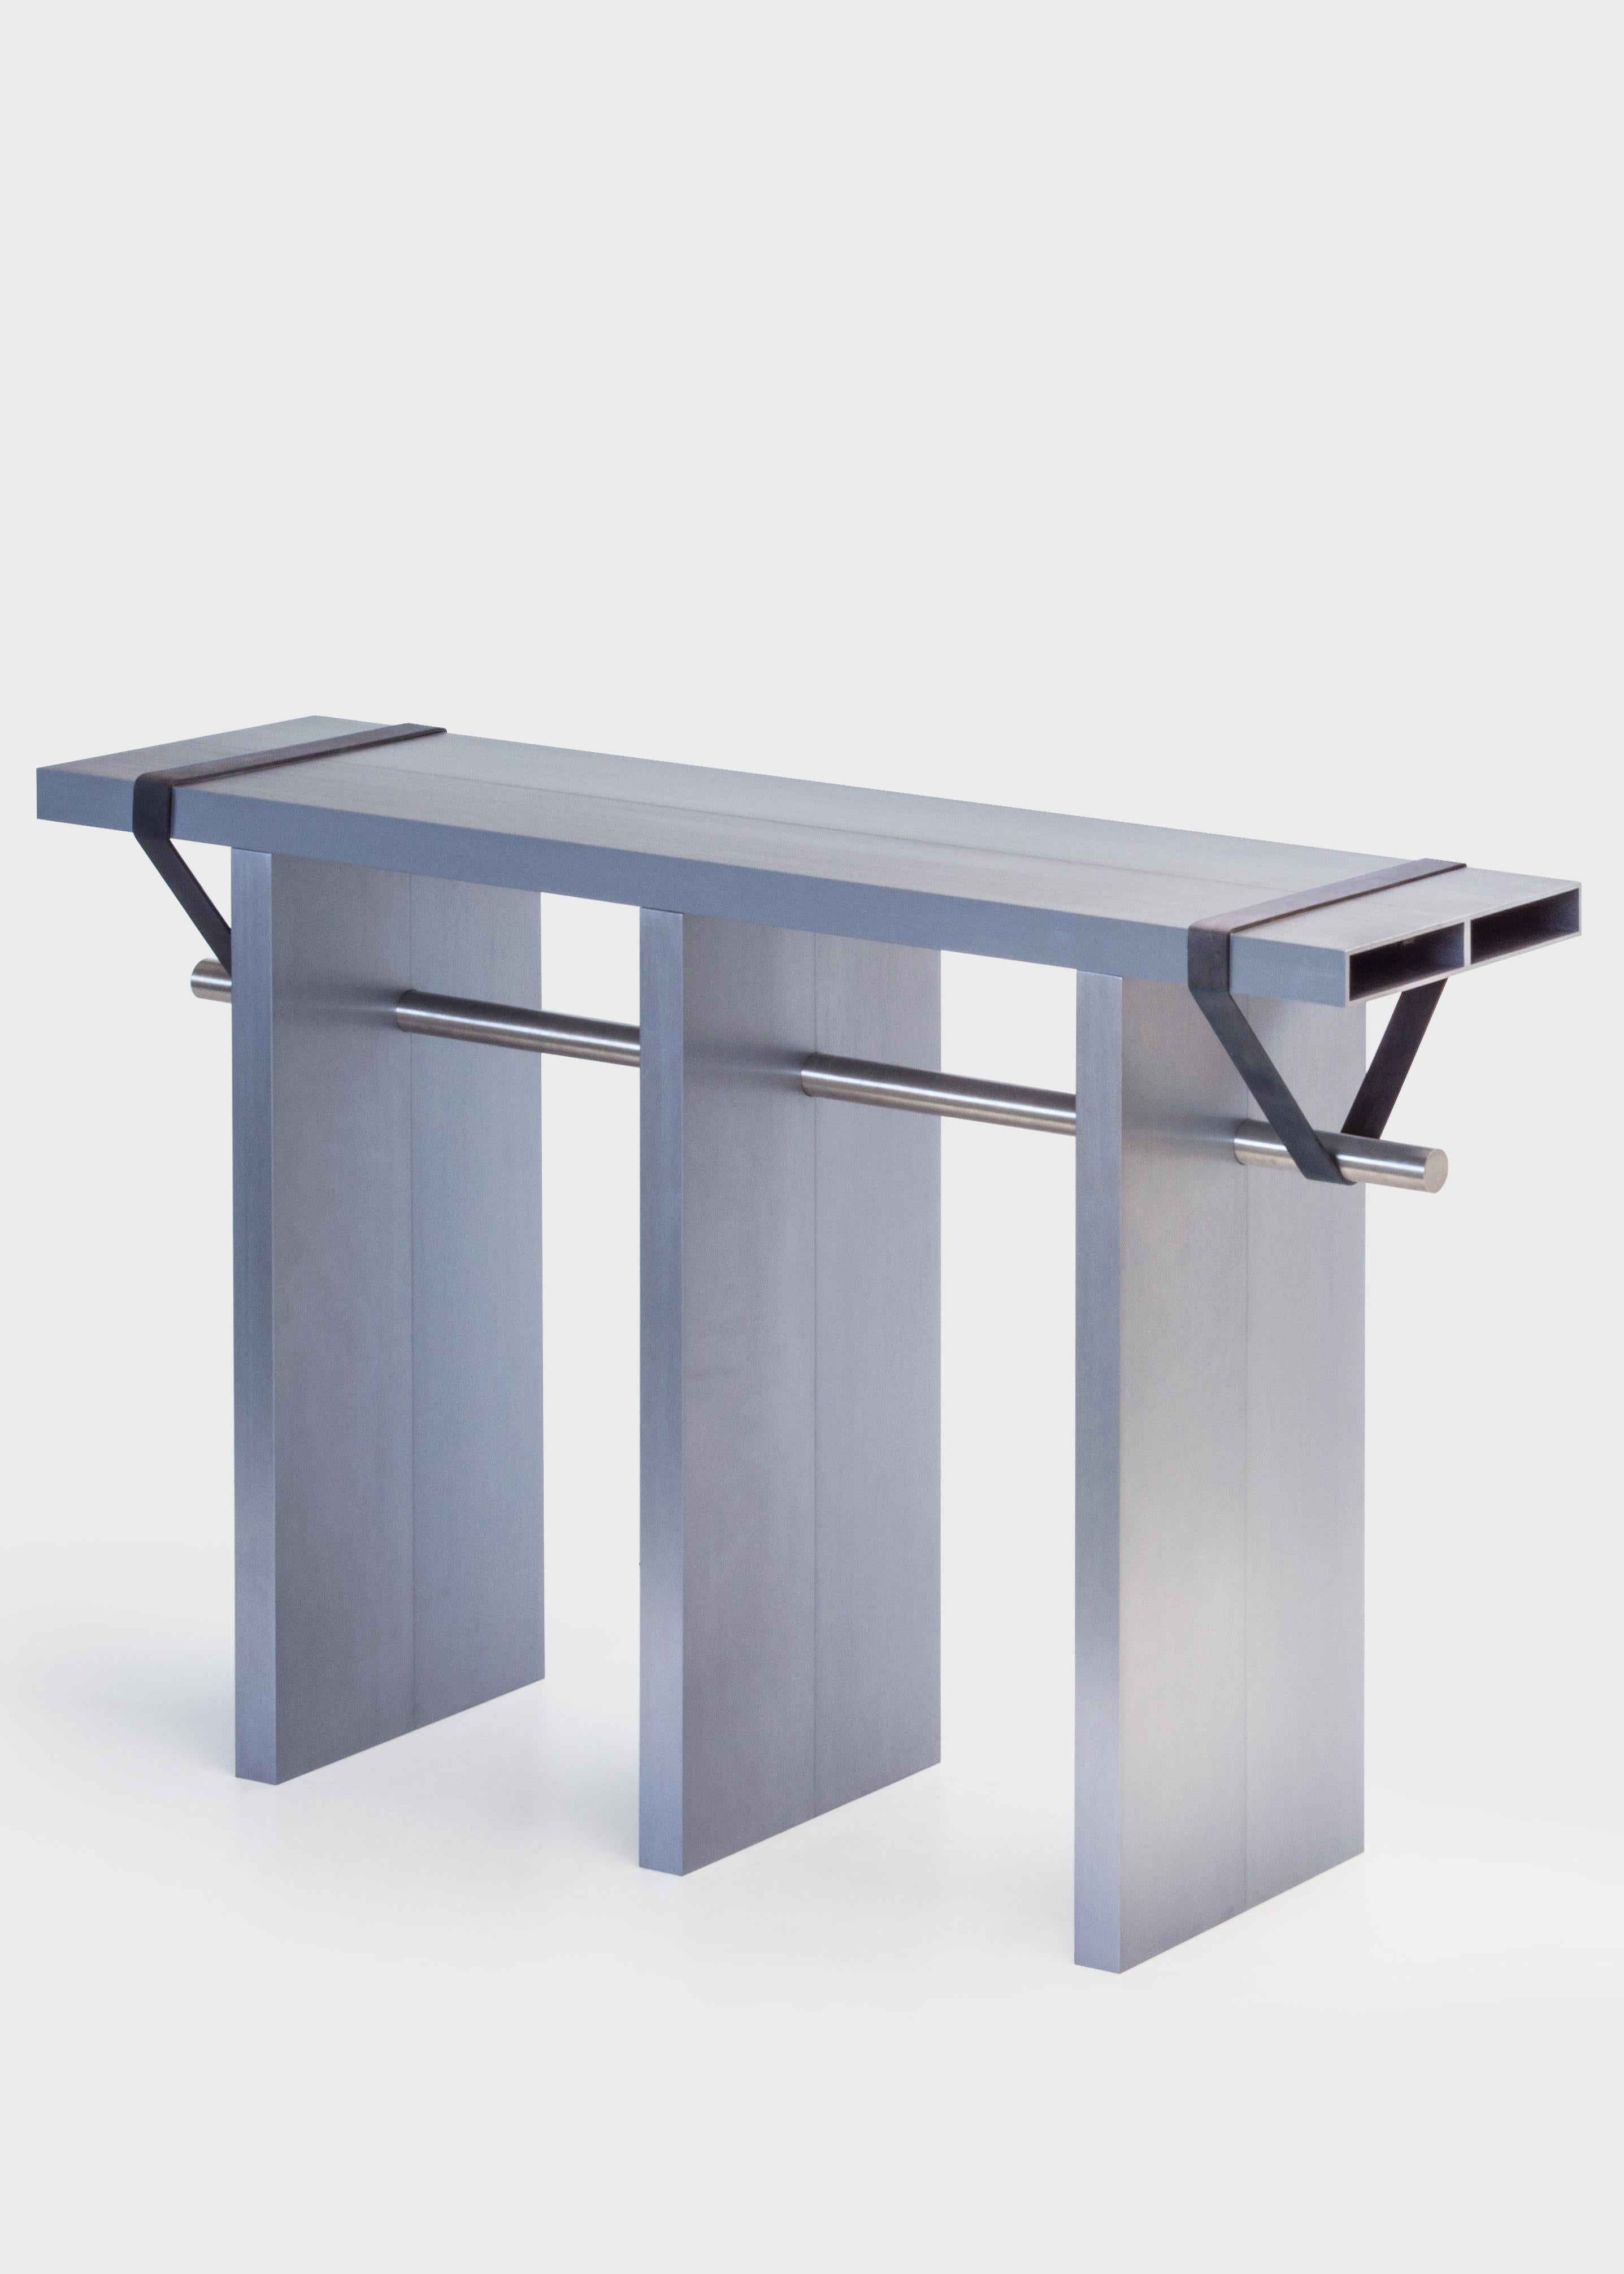 Arke
Console
Aluminum, stainless steel,
Rubber
Measures: H 75, L 120, W 30 cm
Approximate 40kg
Limited Edition of 25

Arke is a radical composition made out of eight brushed and anodized aluminum profiles. The profiles are bolted two by two